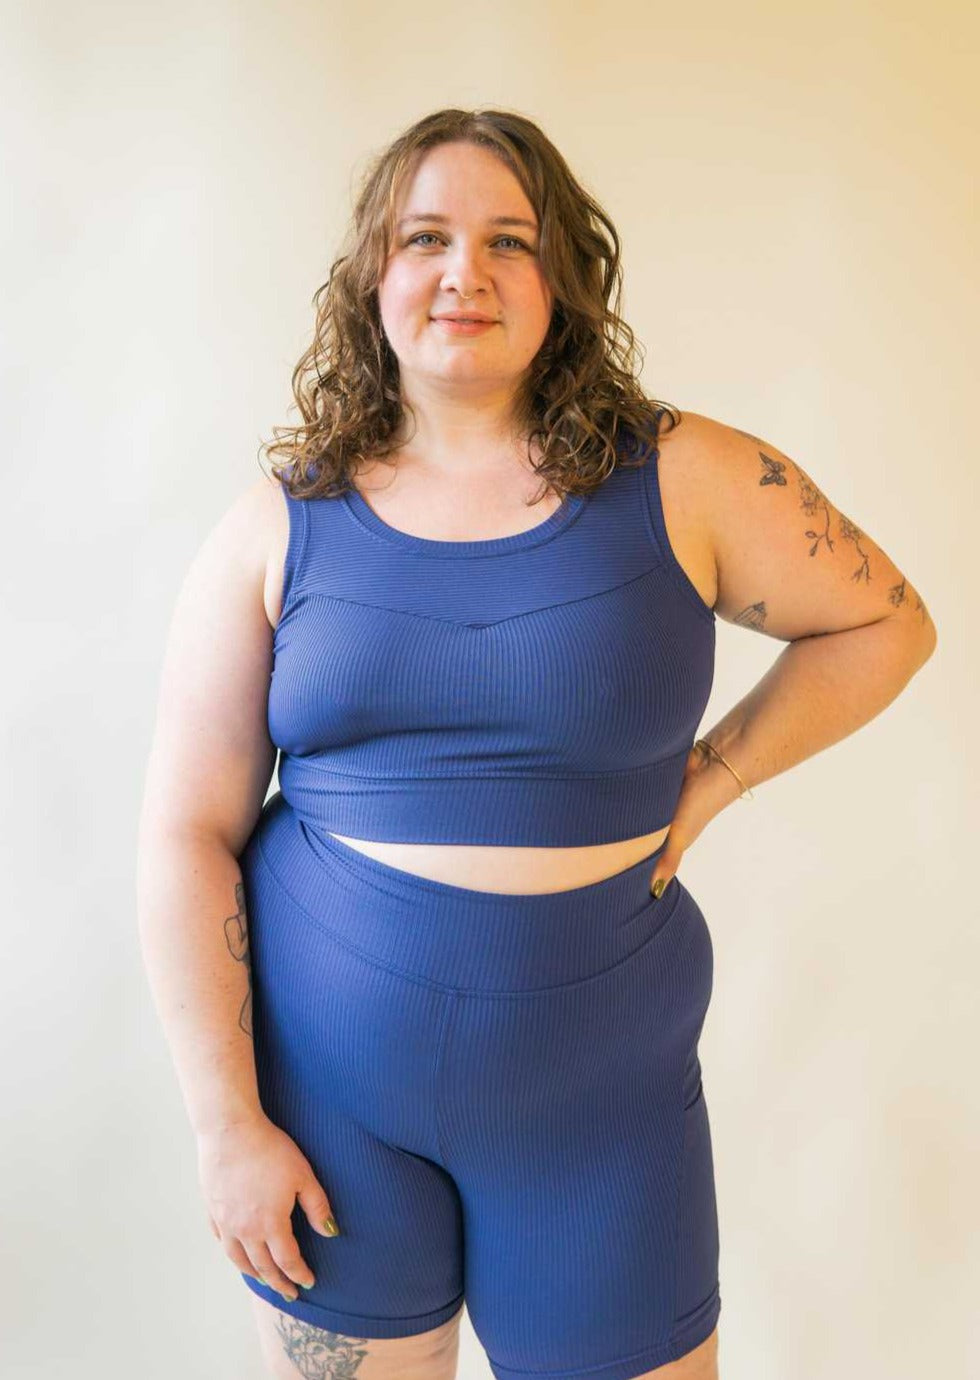 Bronco | Rib Knit Bralette Top in Navy, Street_and_Saddle, local_plus_size_inclusive_ethical